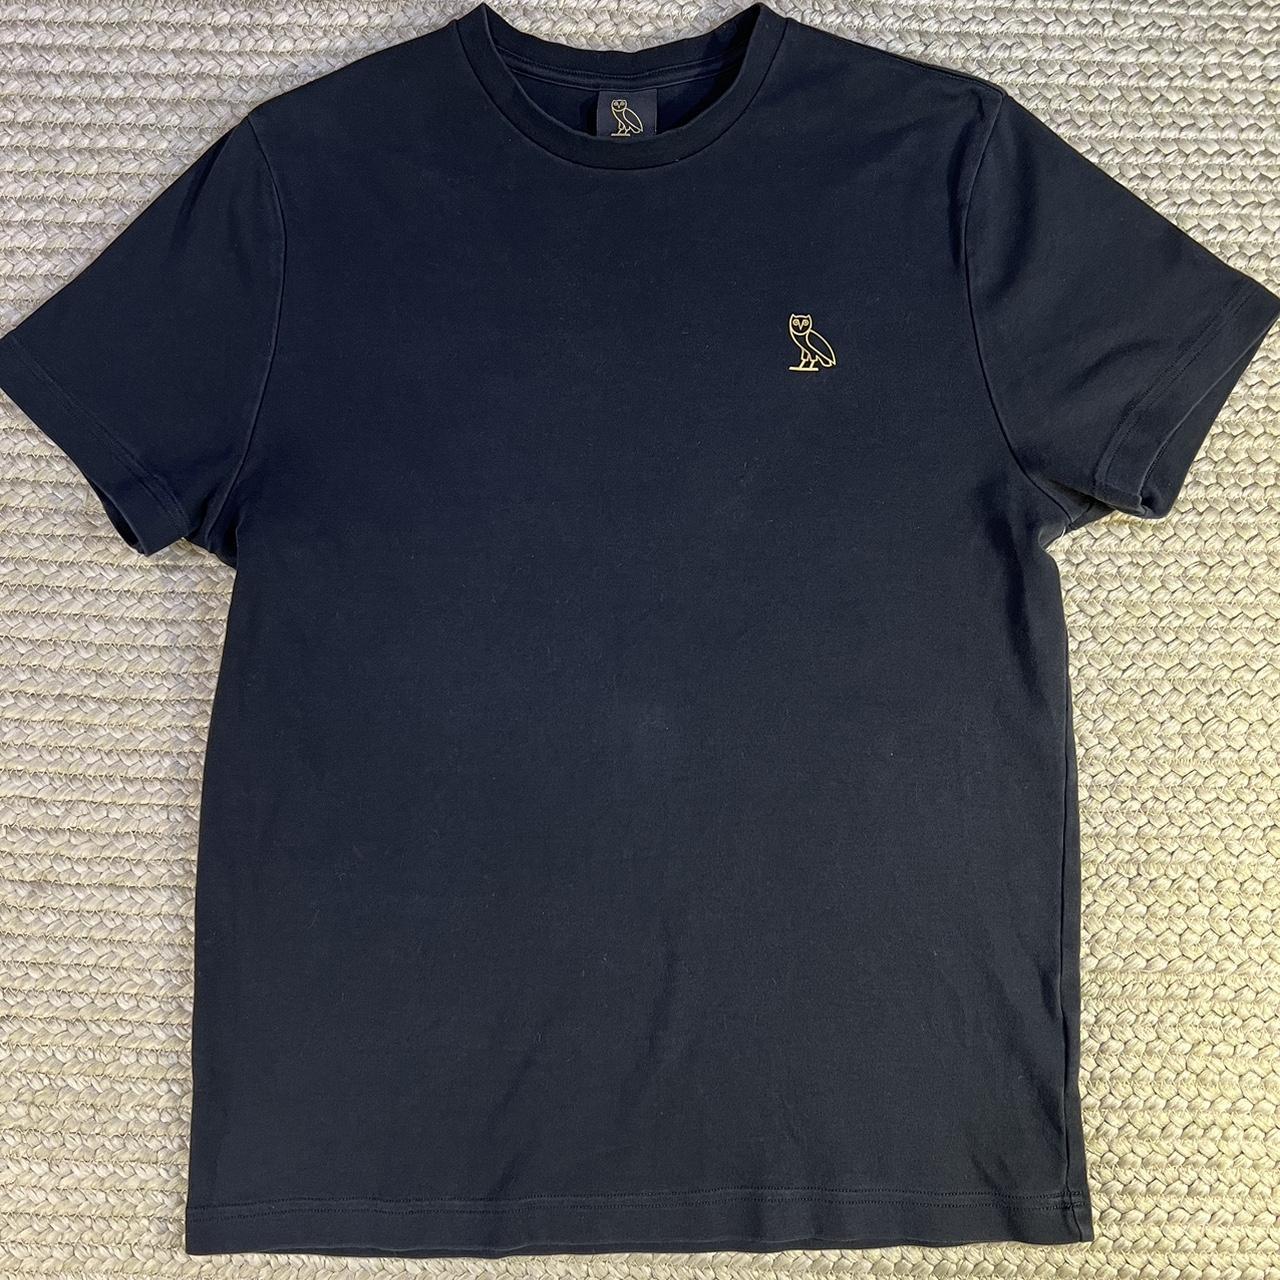 Octobers Very Own Men's Black and Gold T-shirt | Depop